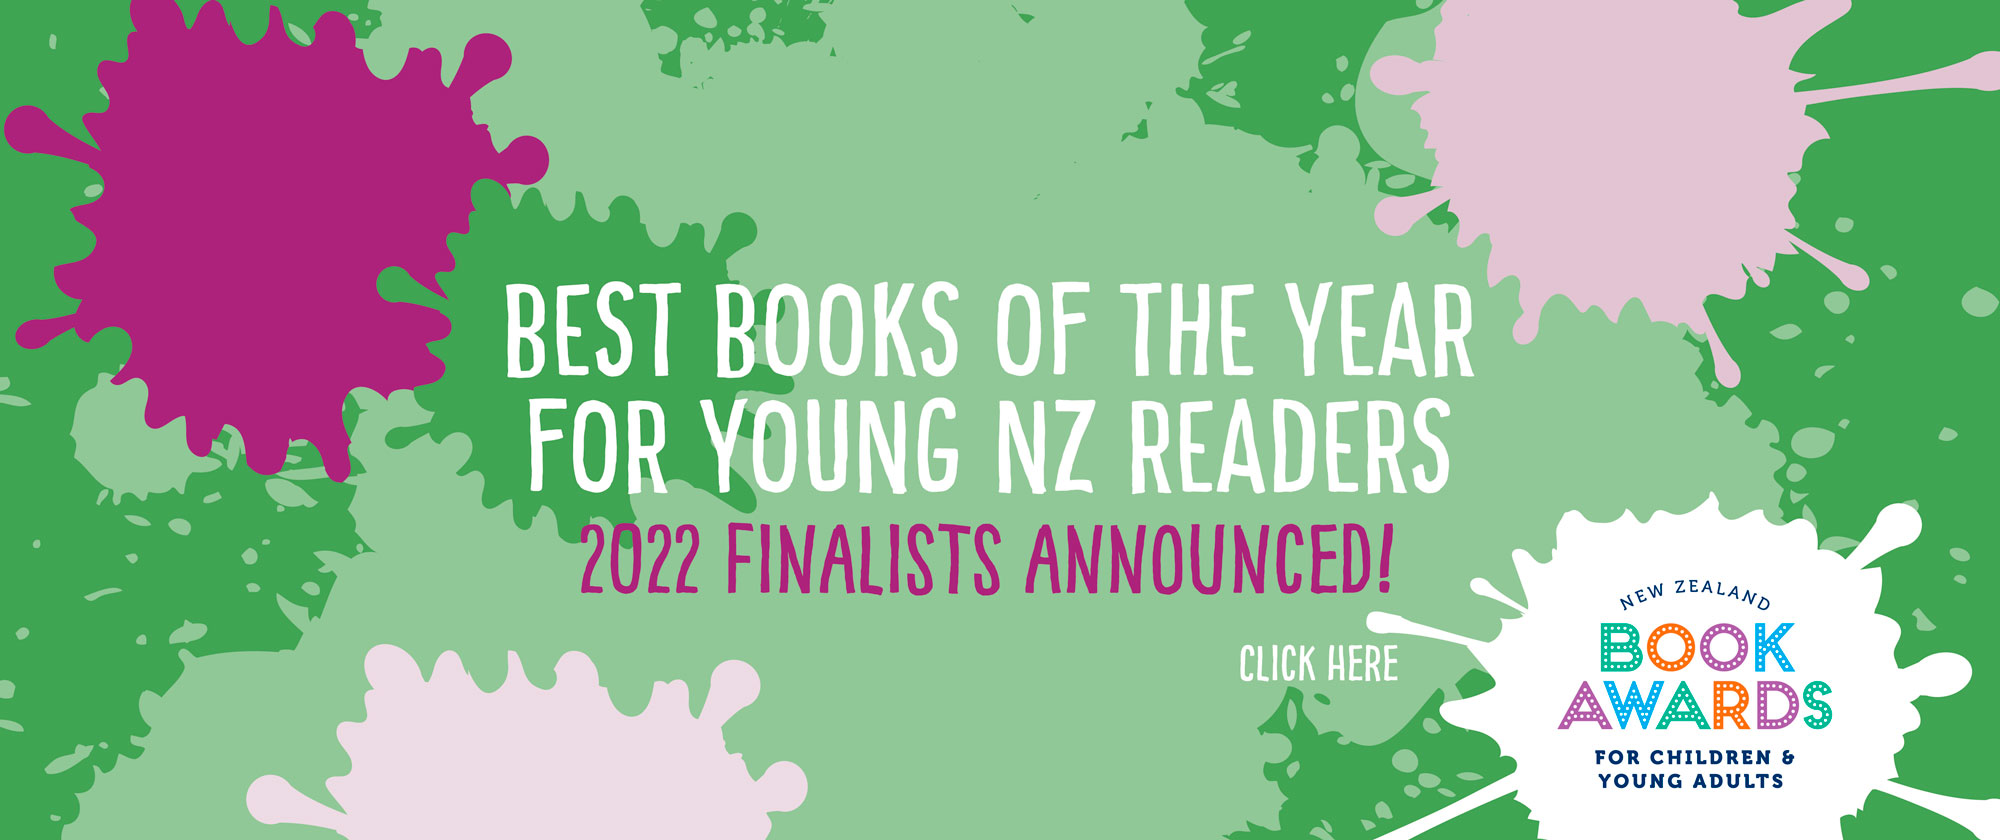 New Zealand Book Awards For Children And Young Adults - 2022 shortlist announced